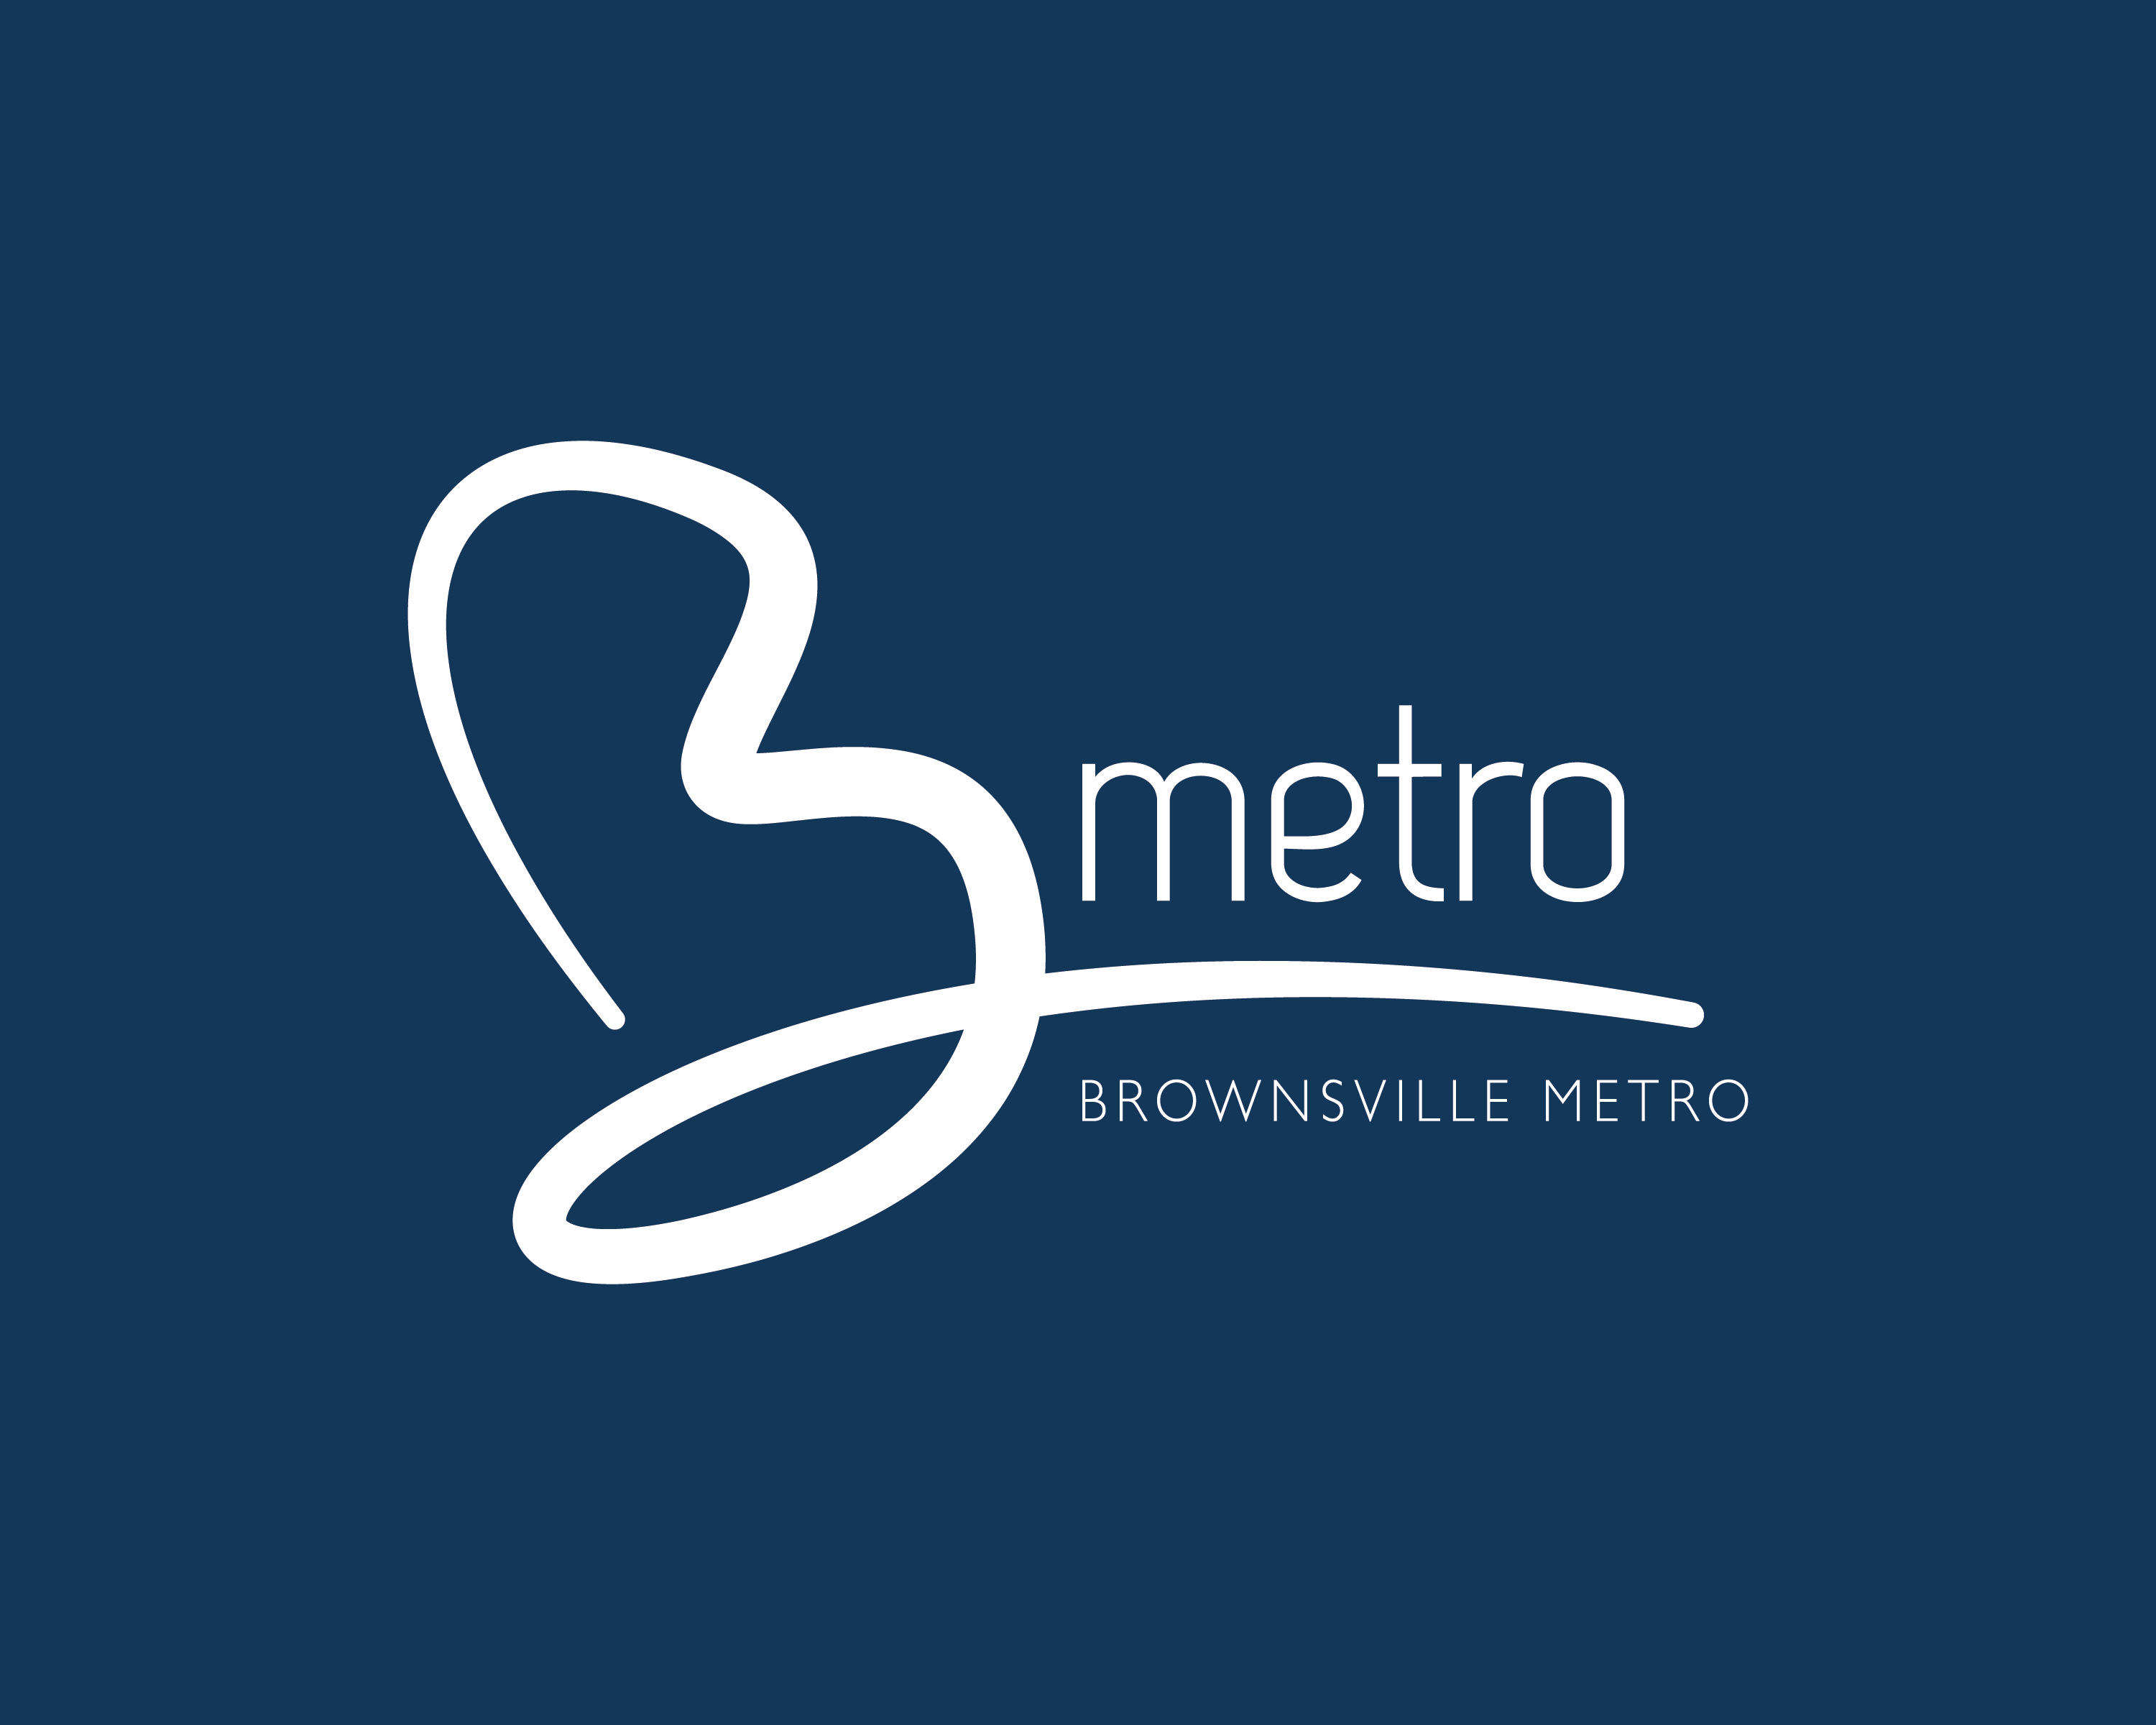 Brownsville Metro provides bus service throughout the City of Brownsville with 16 bus routes running from 6:00 a.m. - 8:00 p.m., Monday through Saturday.